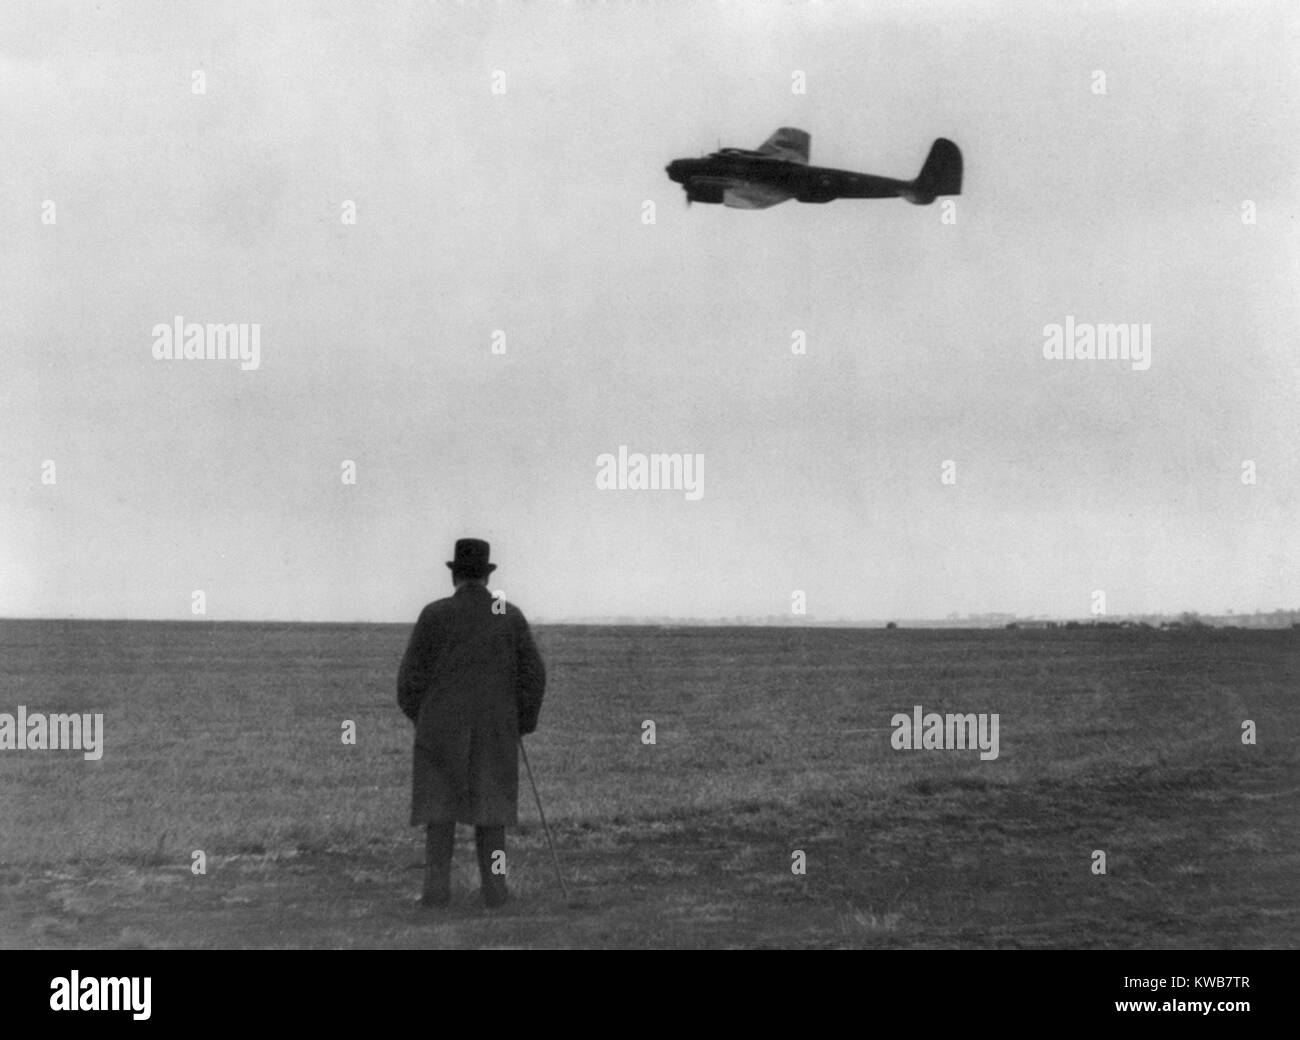 Winston Churchill, photographed from behind, watching B-17 'Flying Fortress' in flight. July 1940. World War 2. (BSLOC 2014 8 180) Stock Photo